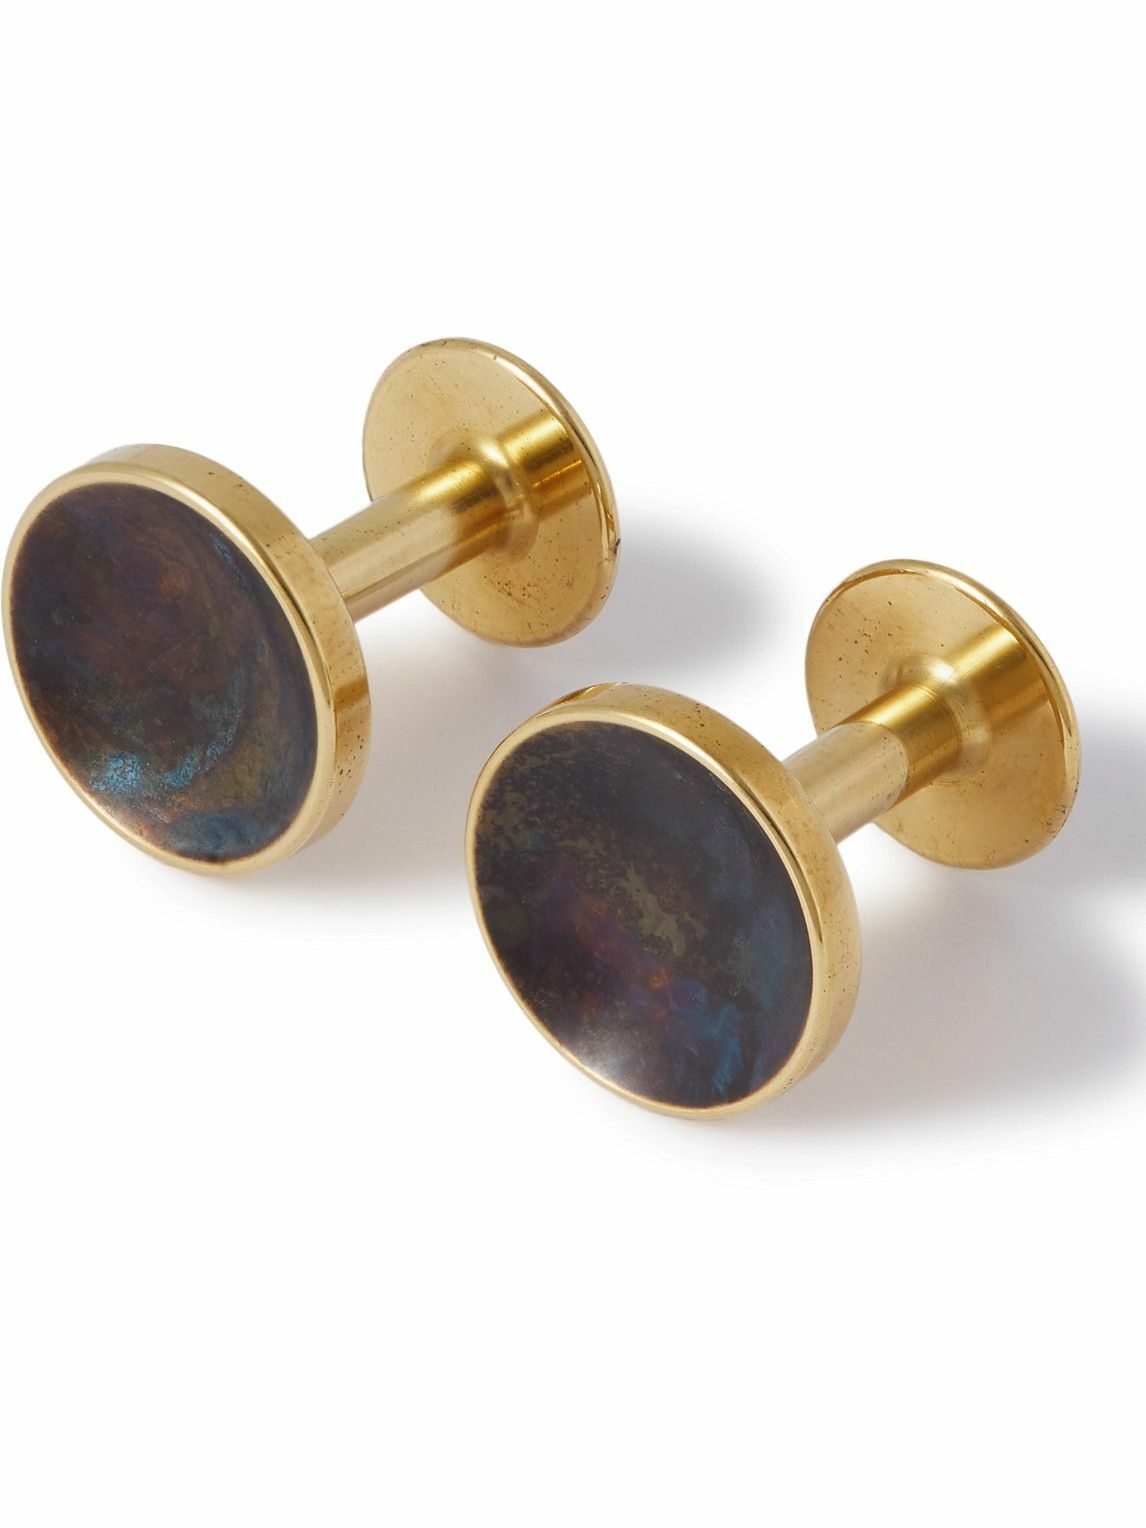 Alice Made This - Bayley Quink Gold-Tone Cufflinks Alice Made This